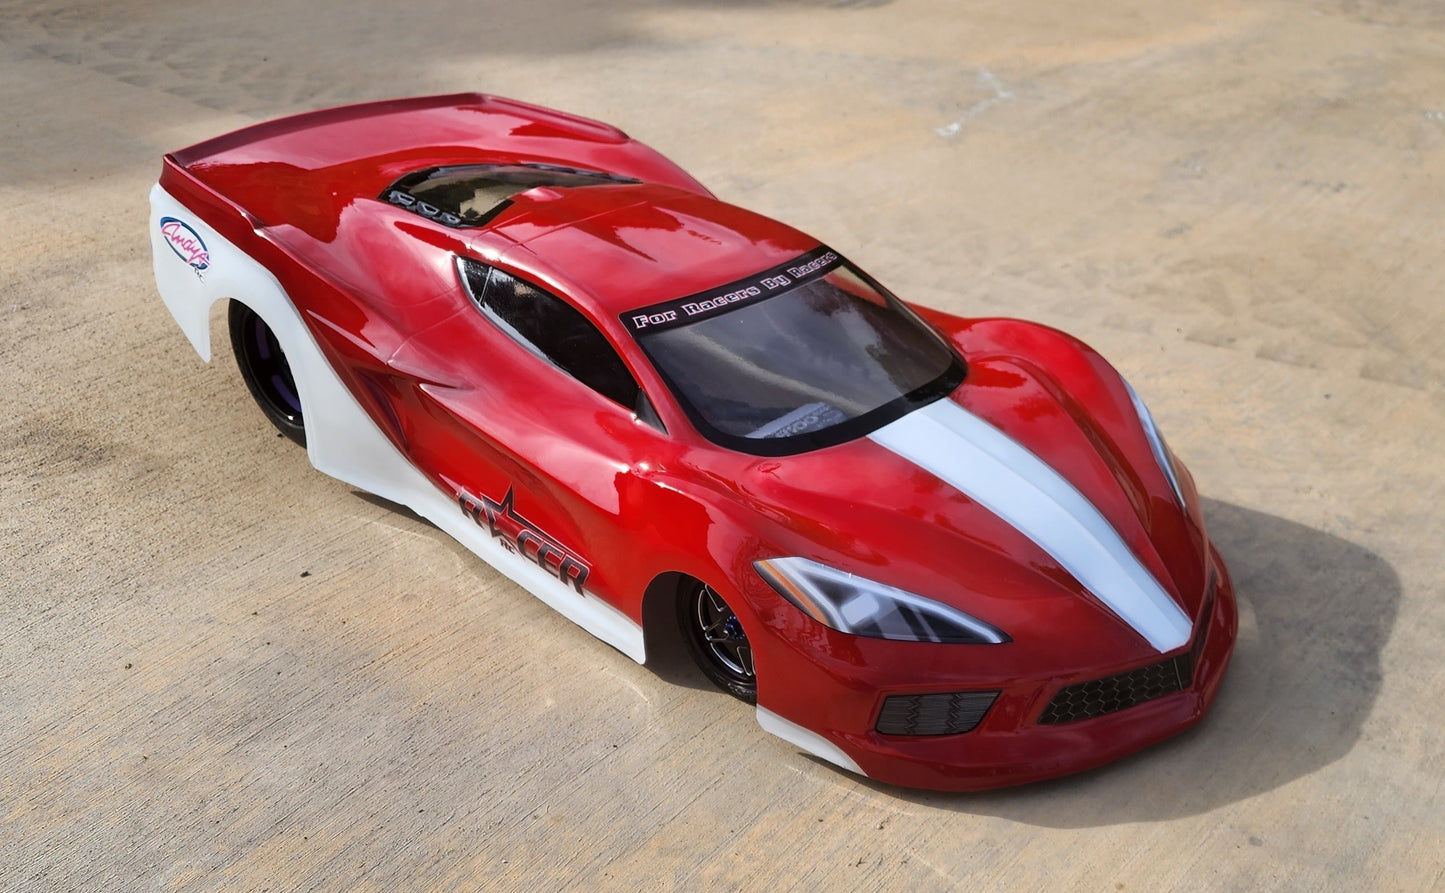 Racer RC by Andy’s RC C8 Z06 No Prep .040 Drag Body